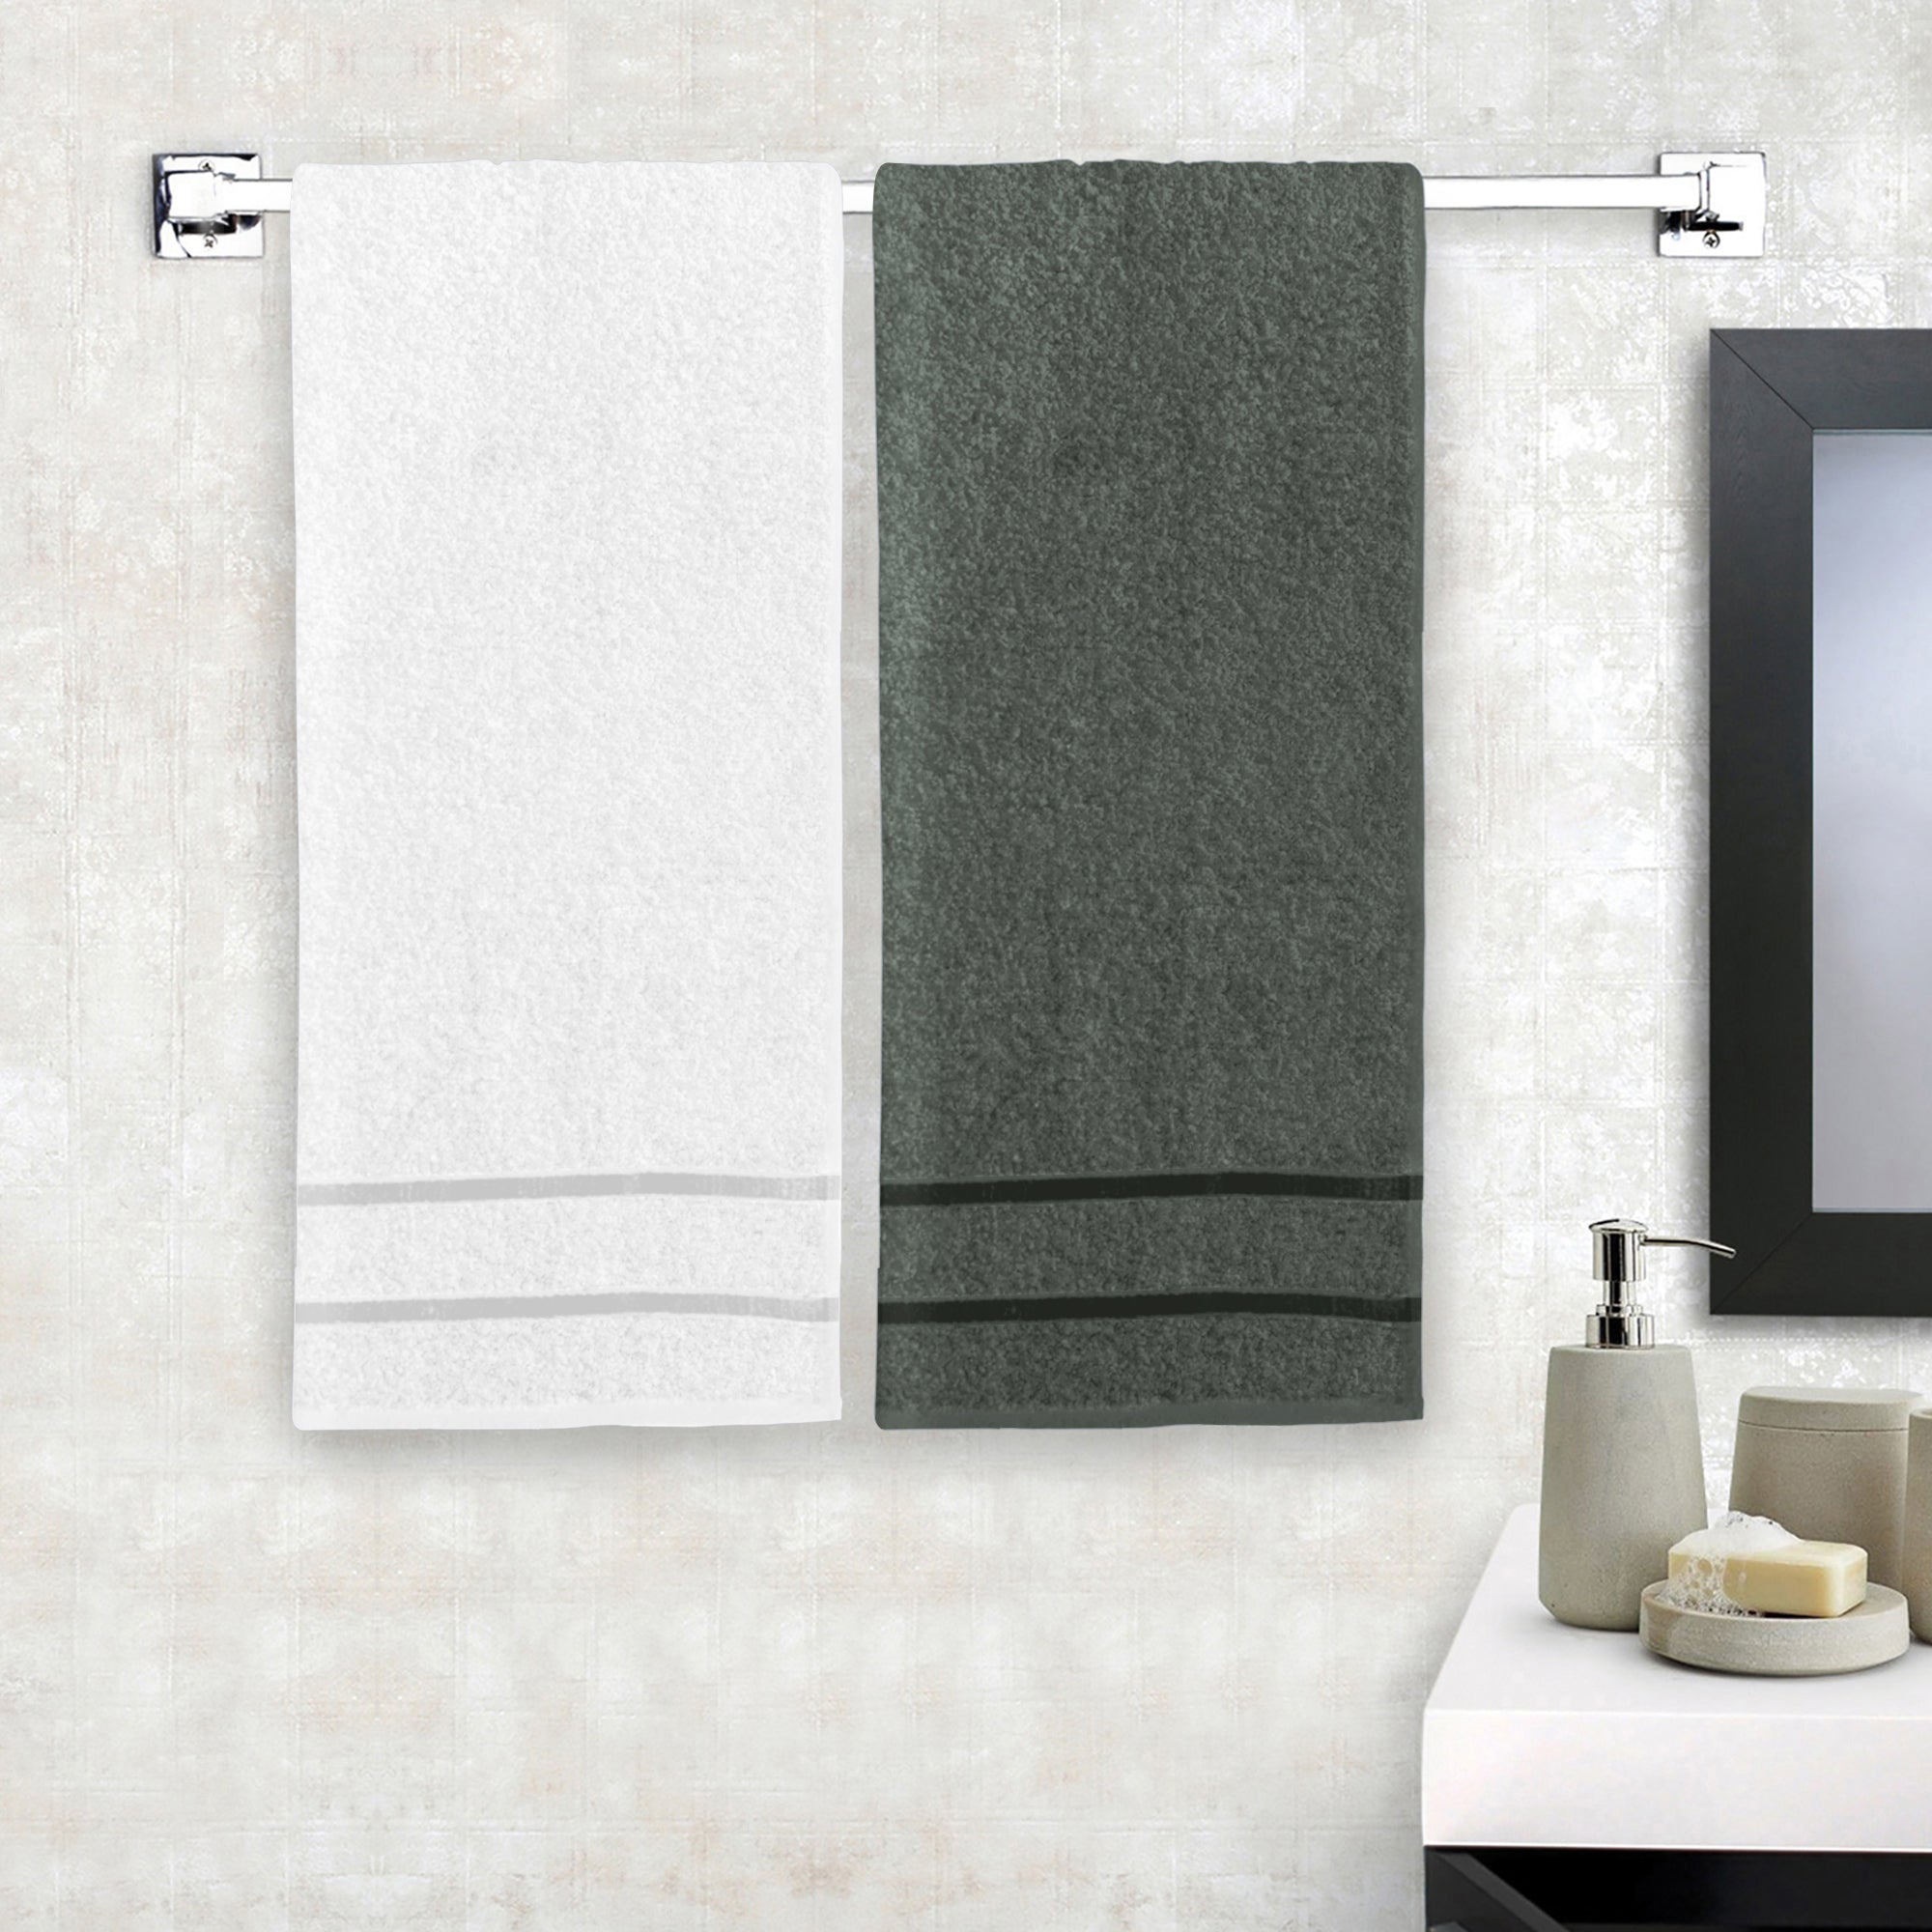 Story@Home 2 Units 100% Cotton Ladies Bath Towels - White and Charcoal Grey